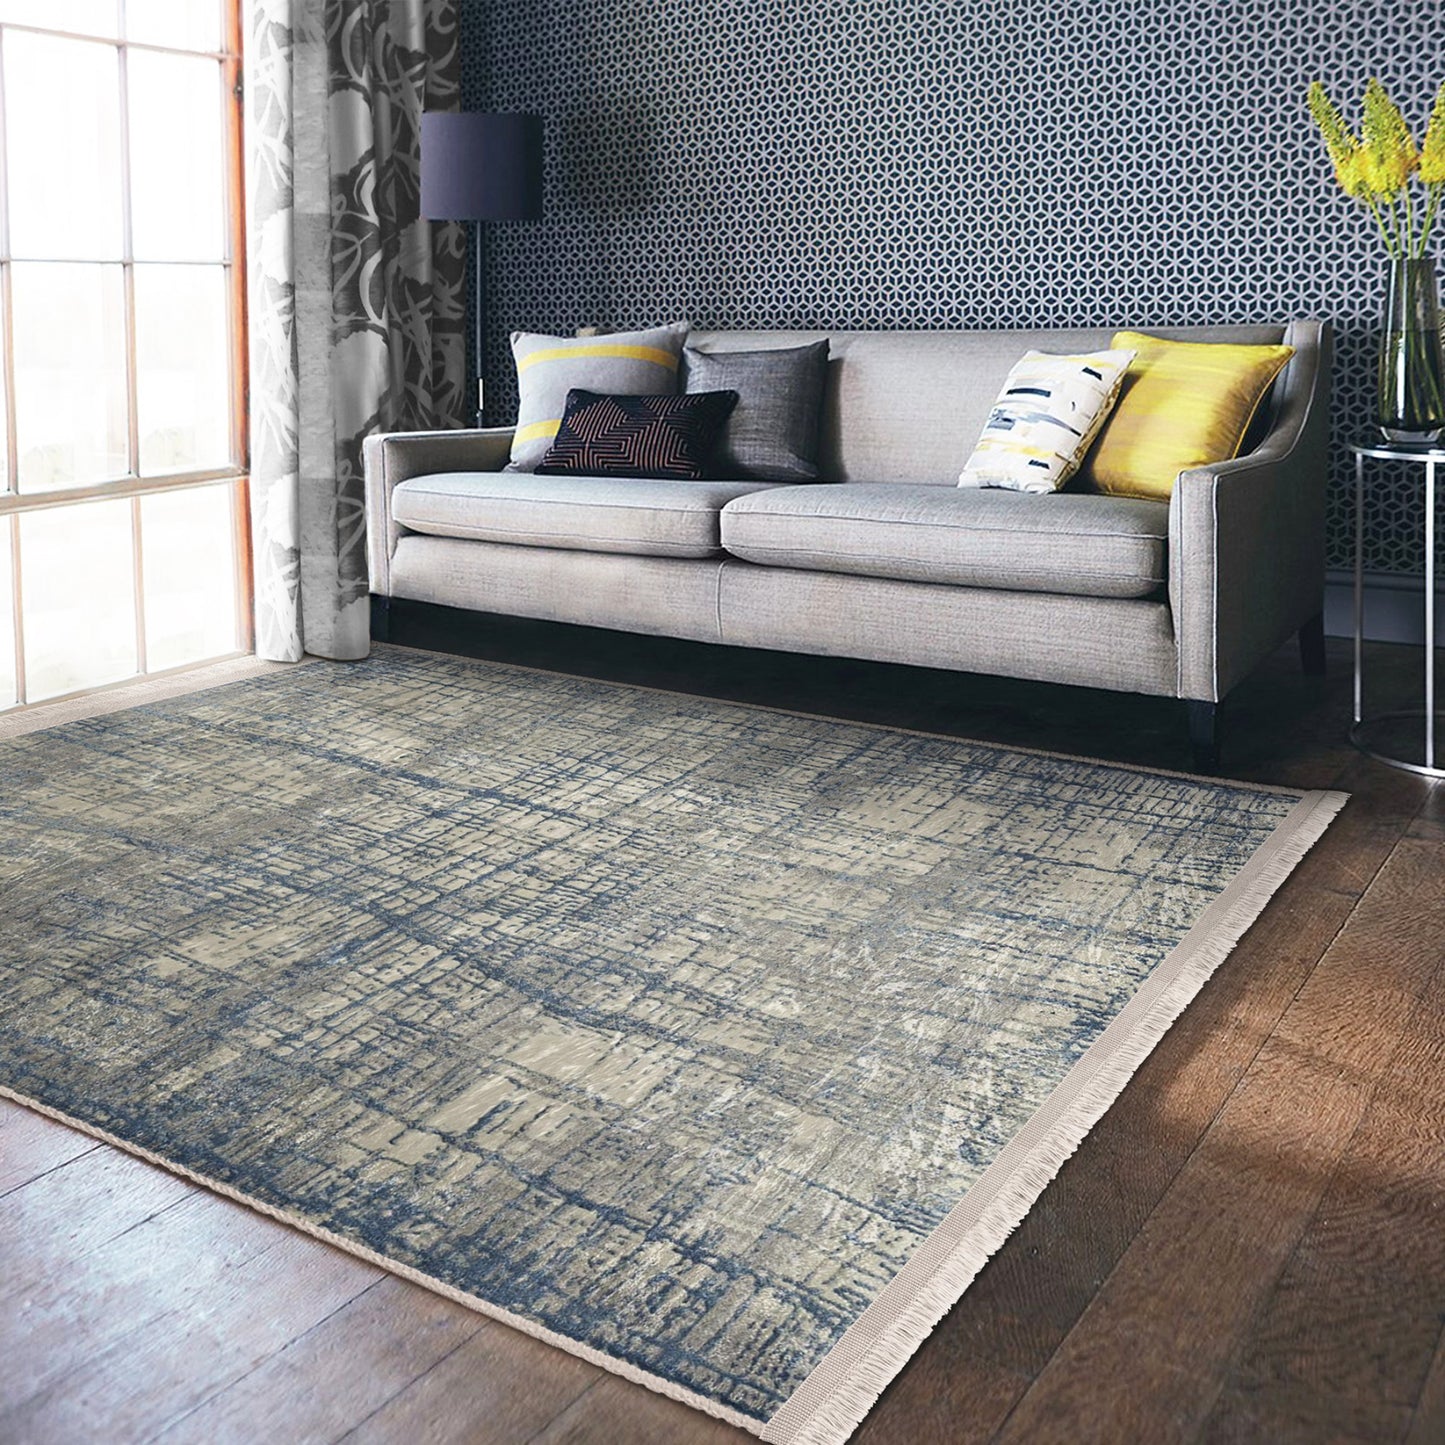 Functional Rug with Tranquil Rustic Design